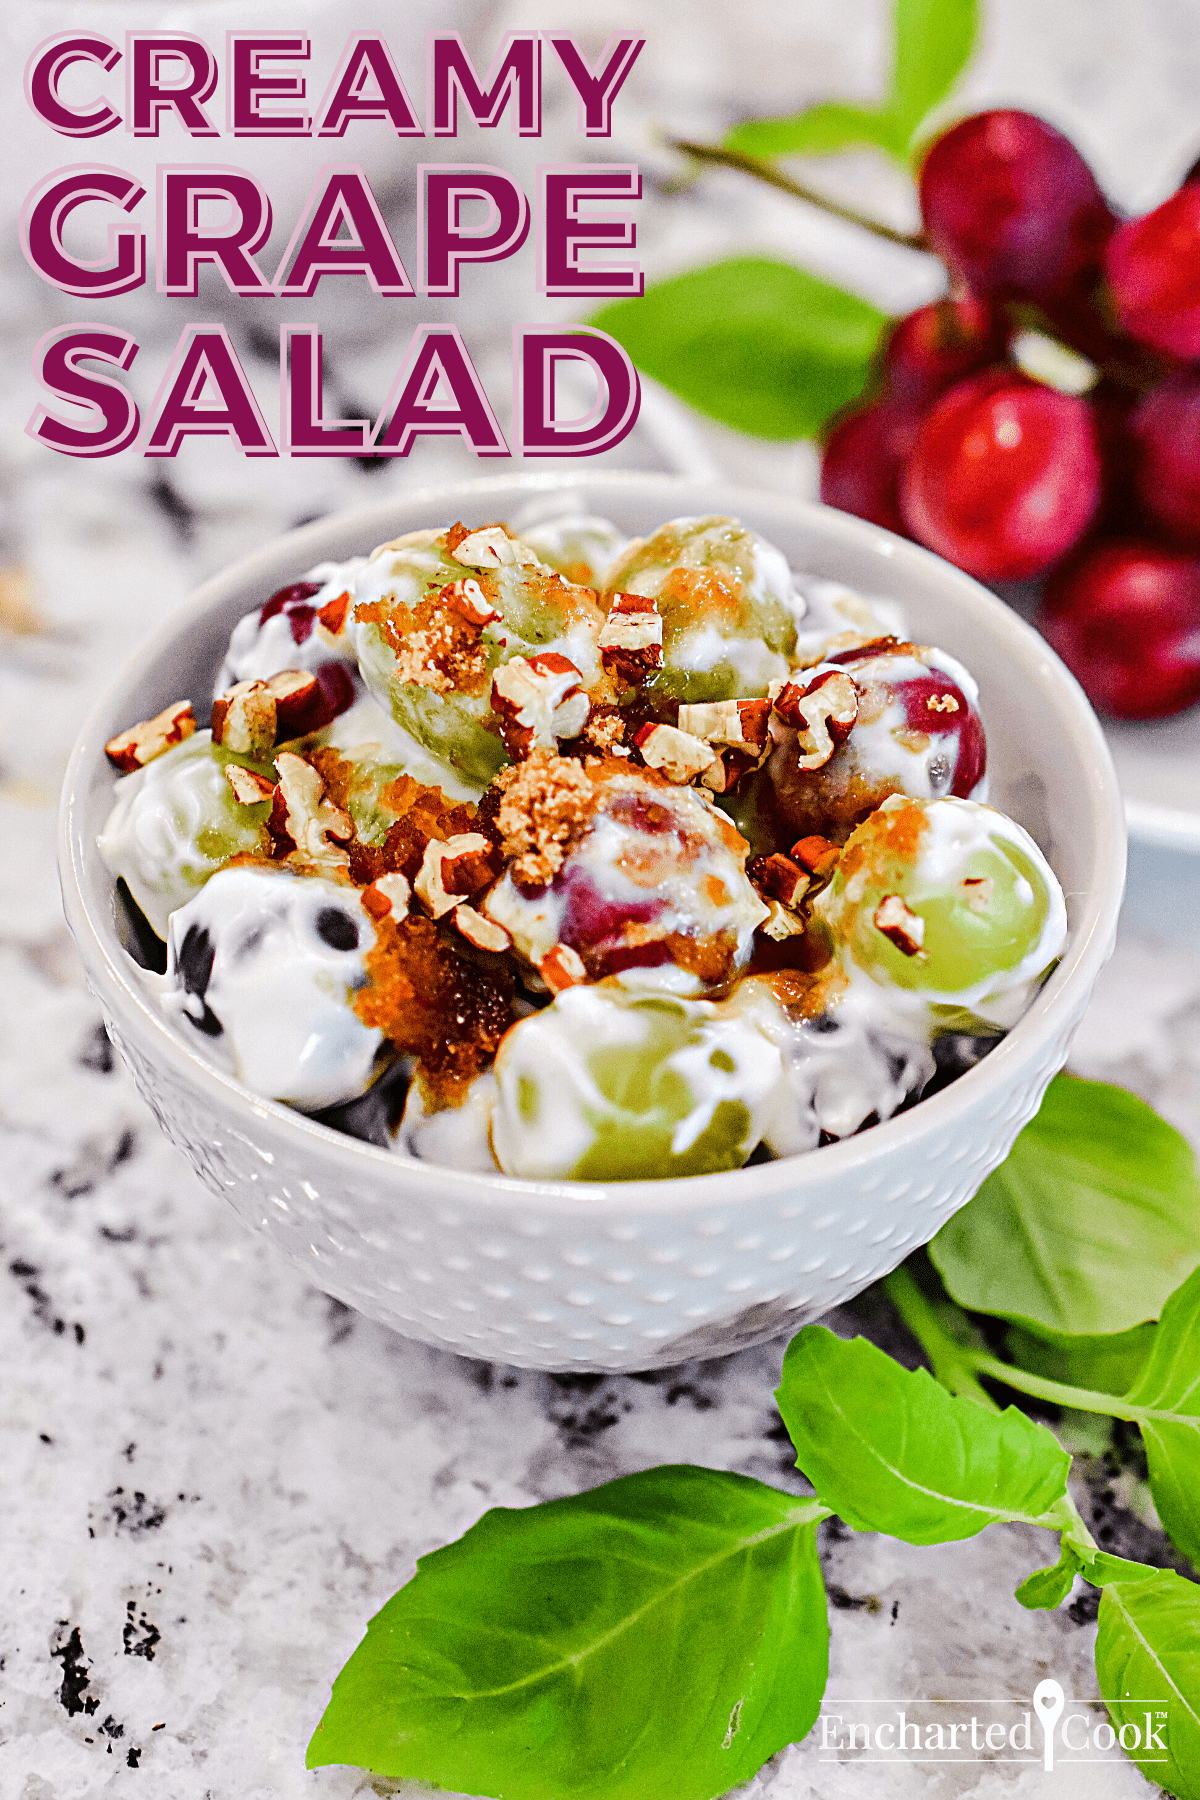 A bowl of salad topped with pecans and brown sugar with text overlay.